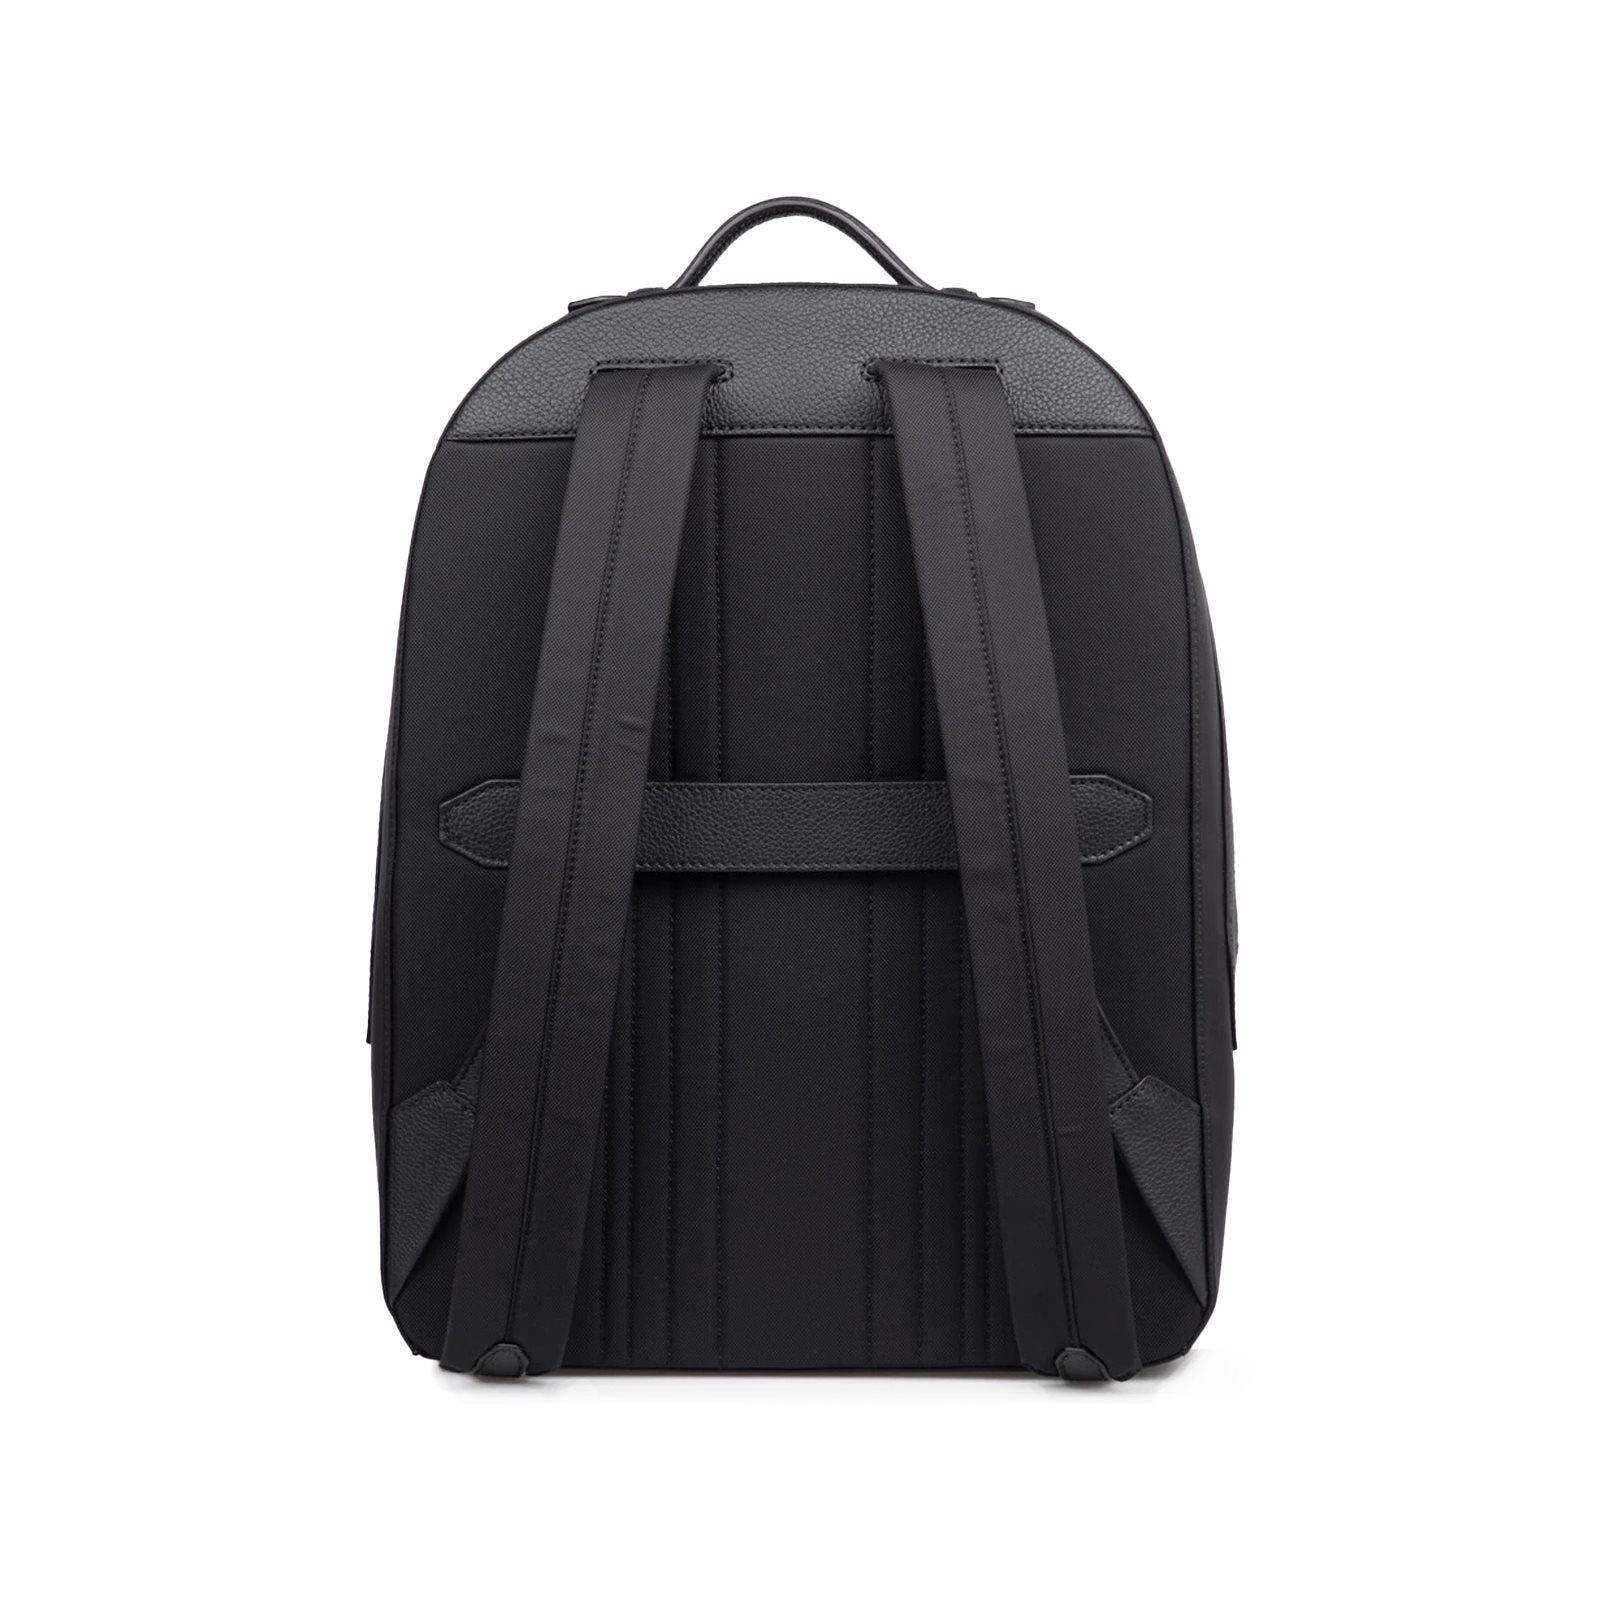 Nylon grained leather backpack